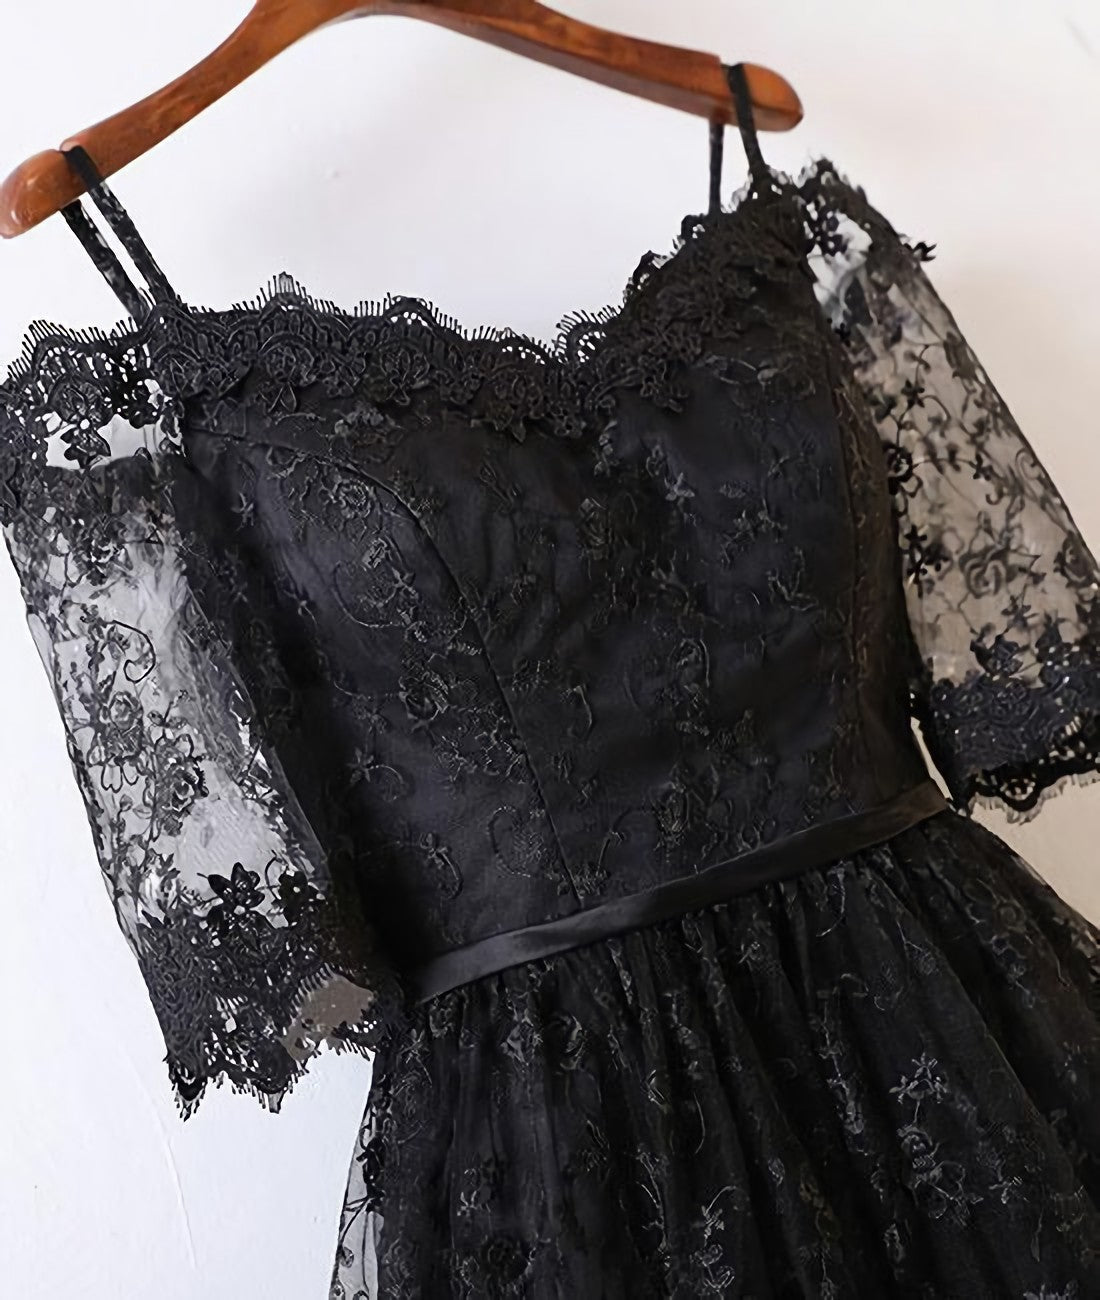 Formal Dress Trends, Black Short Sleeve High Low Homecoming Dresses, Lace Appliques Sweetheart Prom Dress